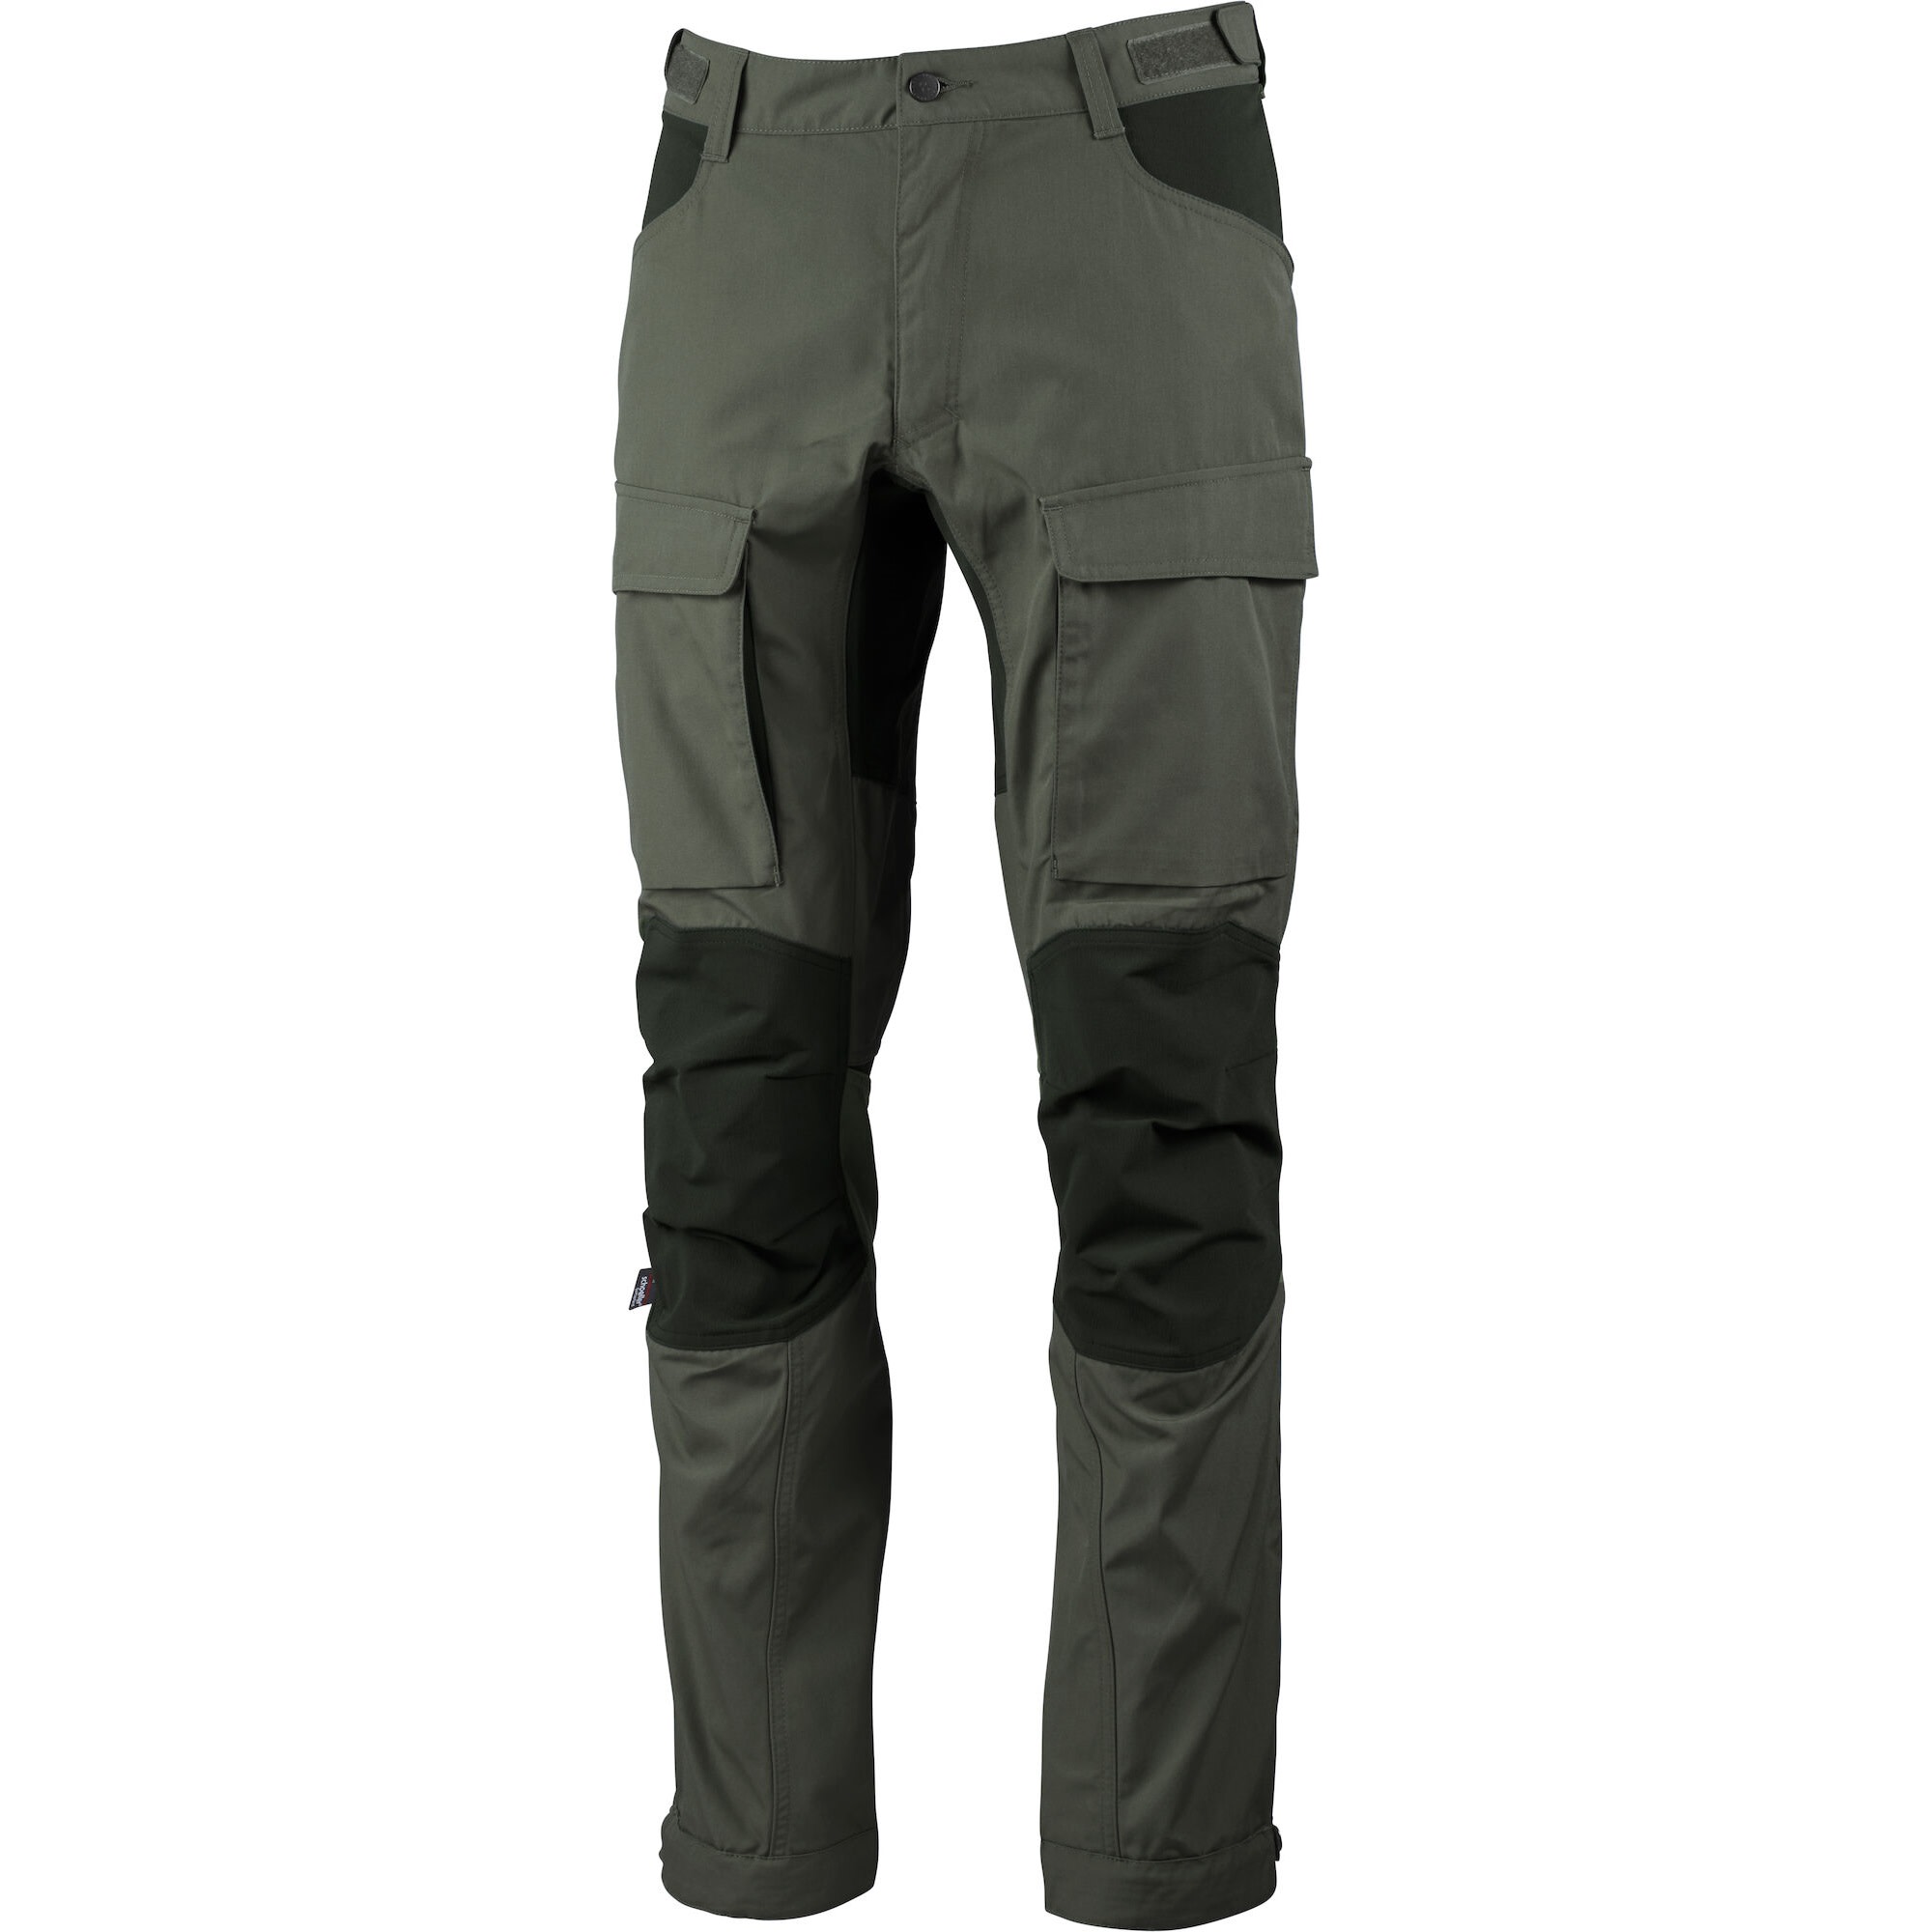 Lundhags Women’s Authentic II Pant Long Forest Green/Dark Forest